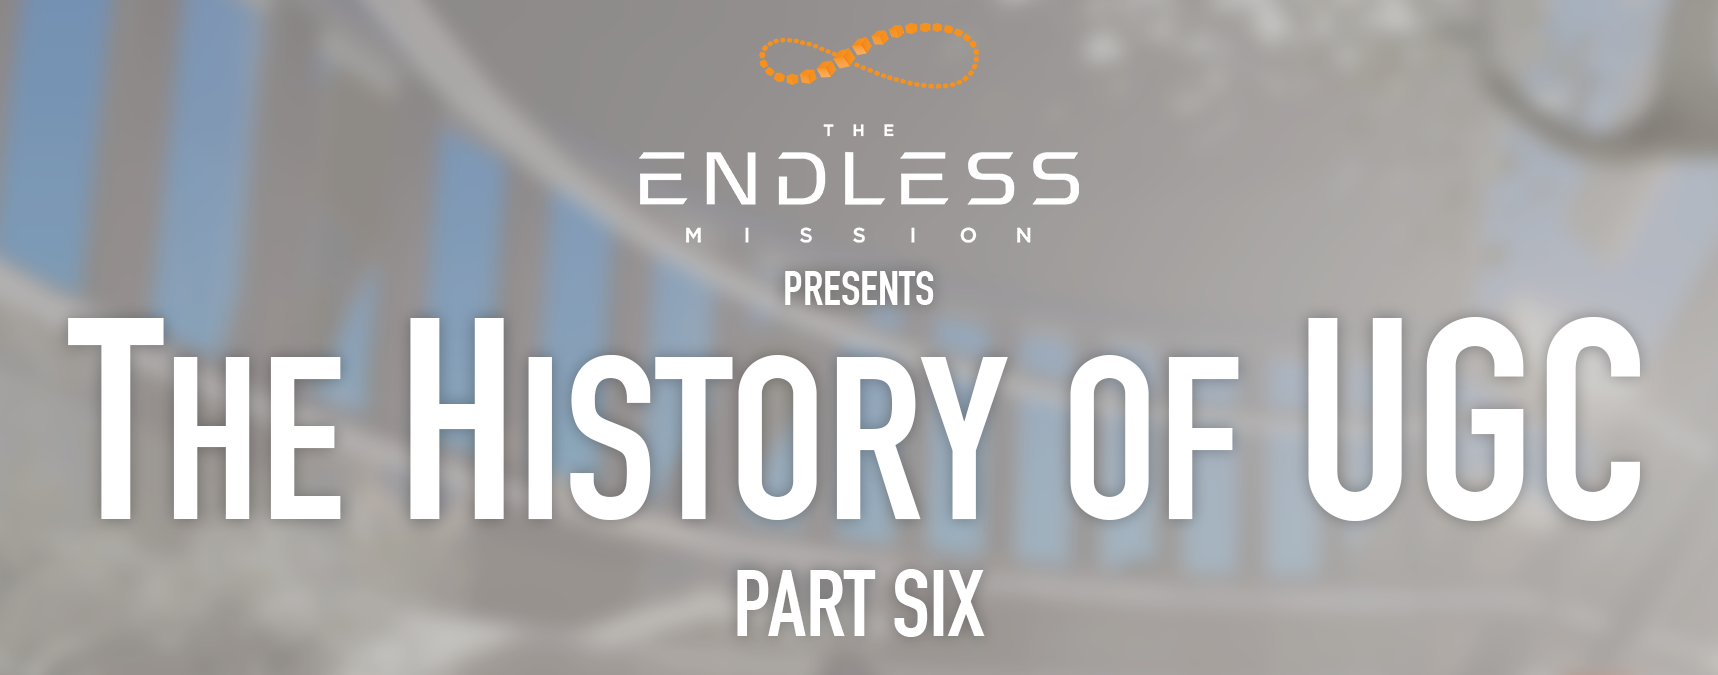 Jul 1 2019 The Endless Mission And The History Of Ugc Part 6 The